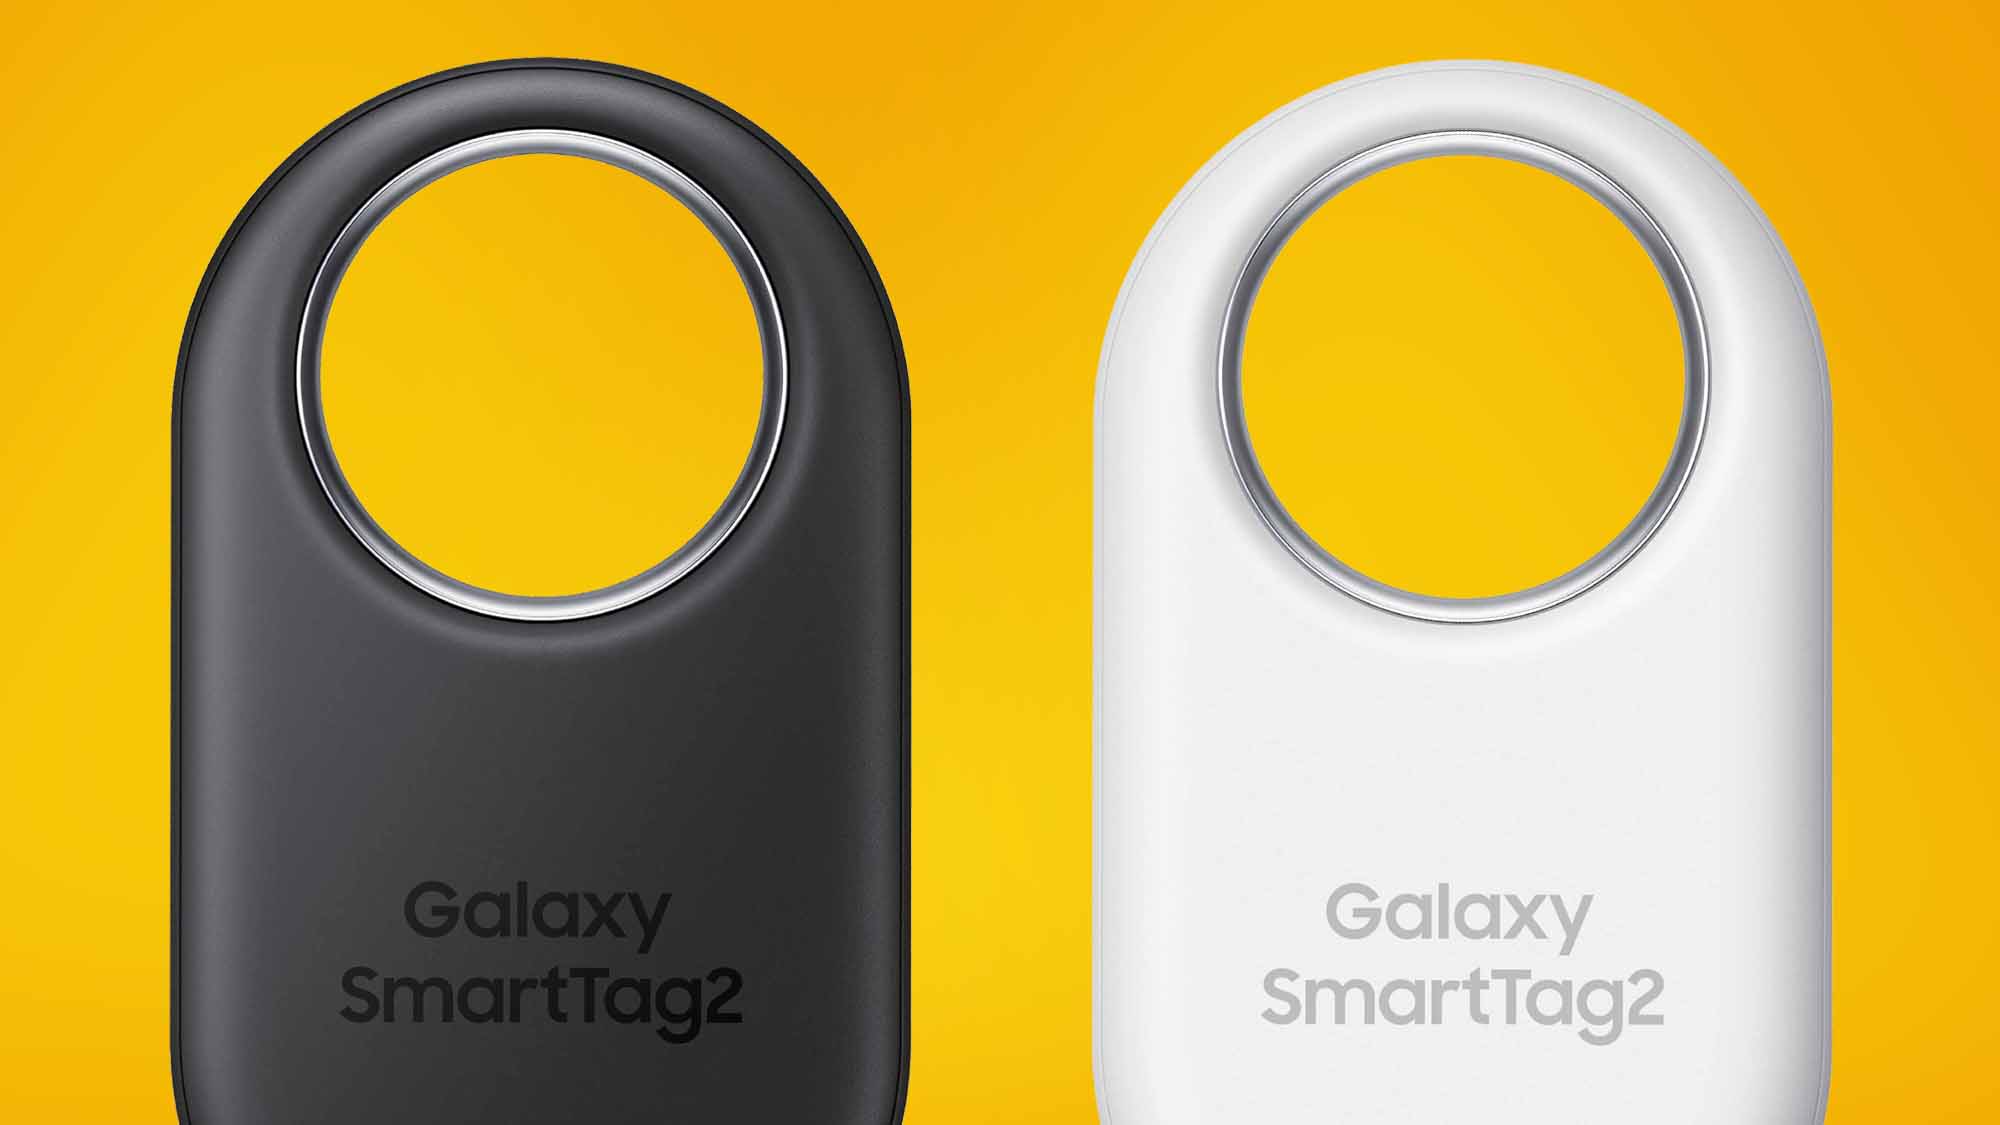 The Samsung Galaxy SmartTag2 is here, but where is Google's true AirTags  rival?